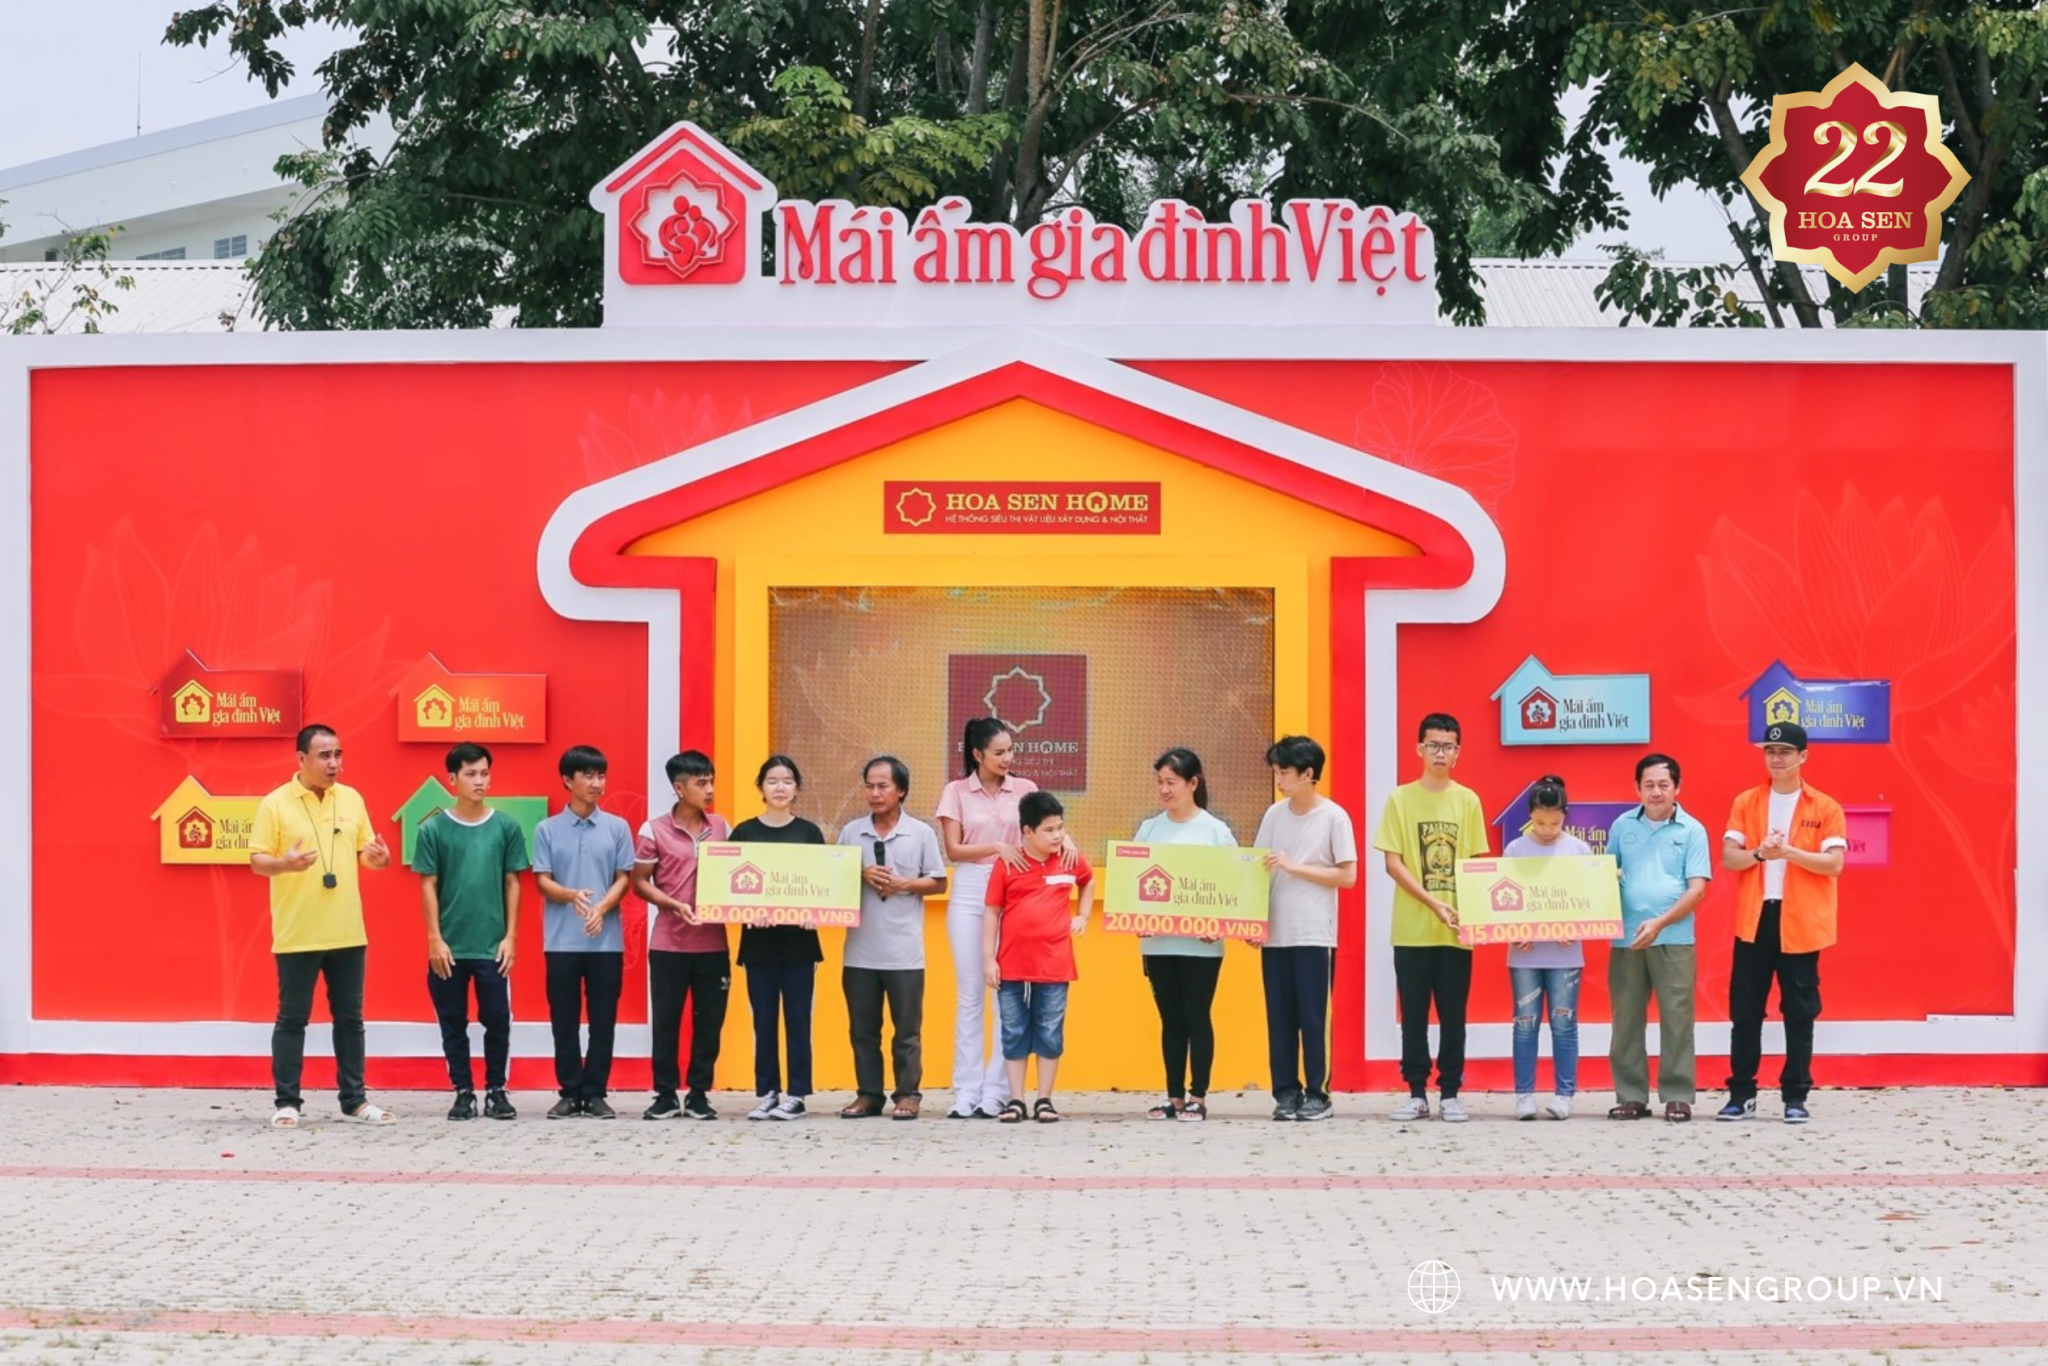 Vietnamese Family Shelter - Sow seeds of happiness, spread kindness to the community